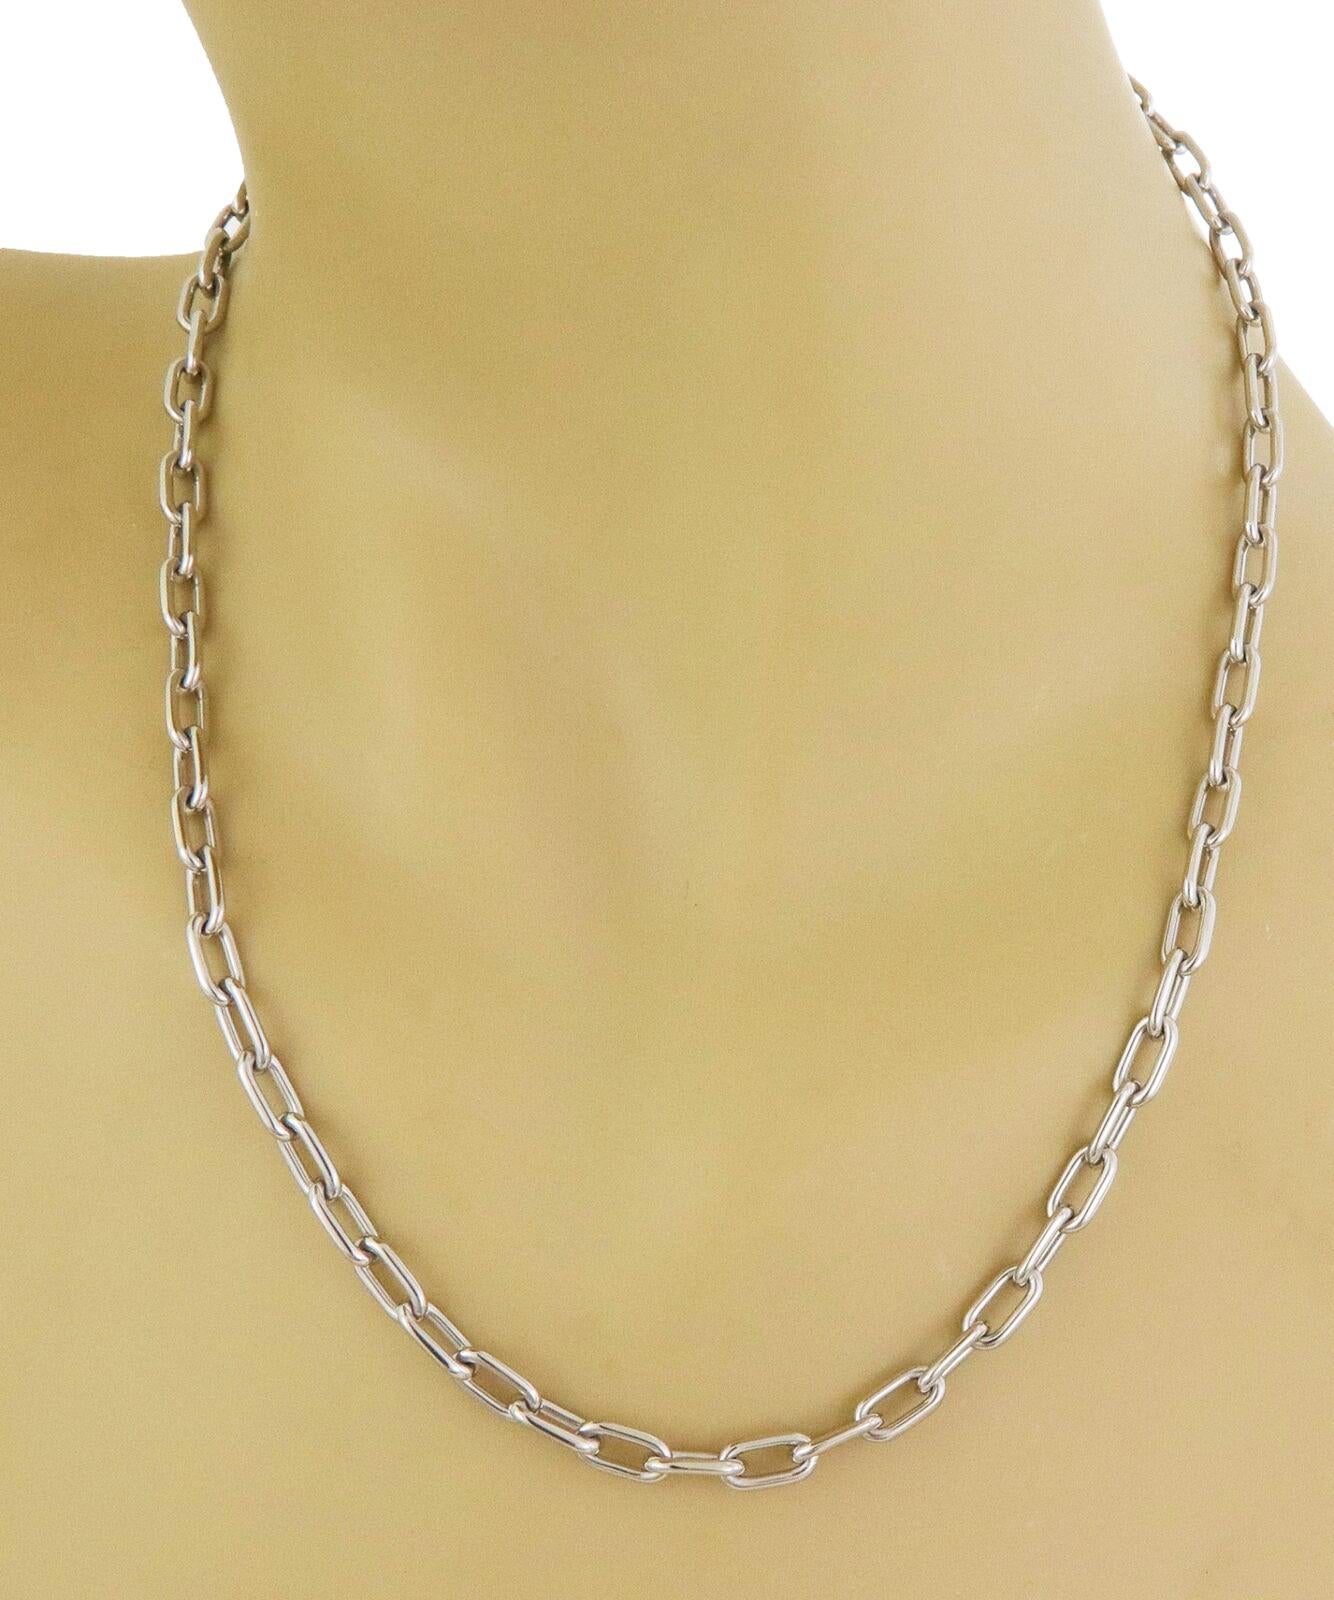 Women's or Men's Cartier Spartacus 18k White Gold Oval Link Chain Necklace  For Sale